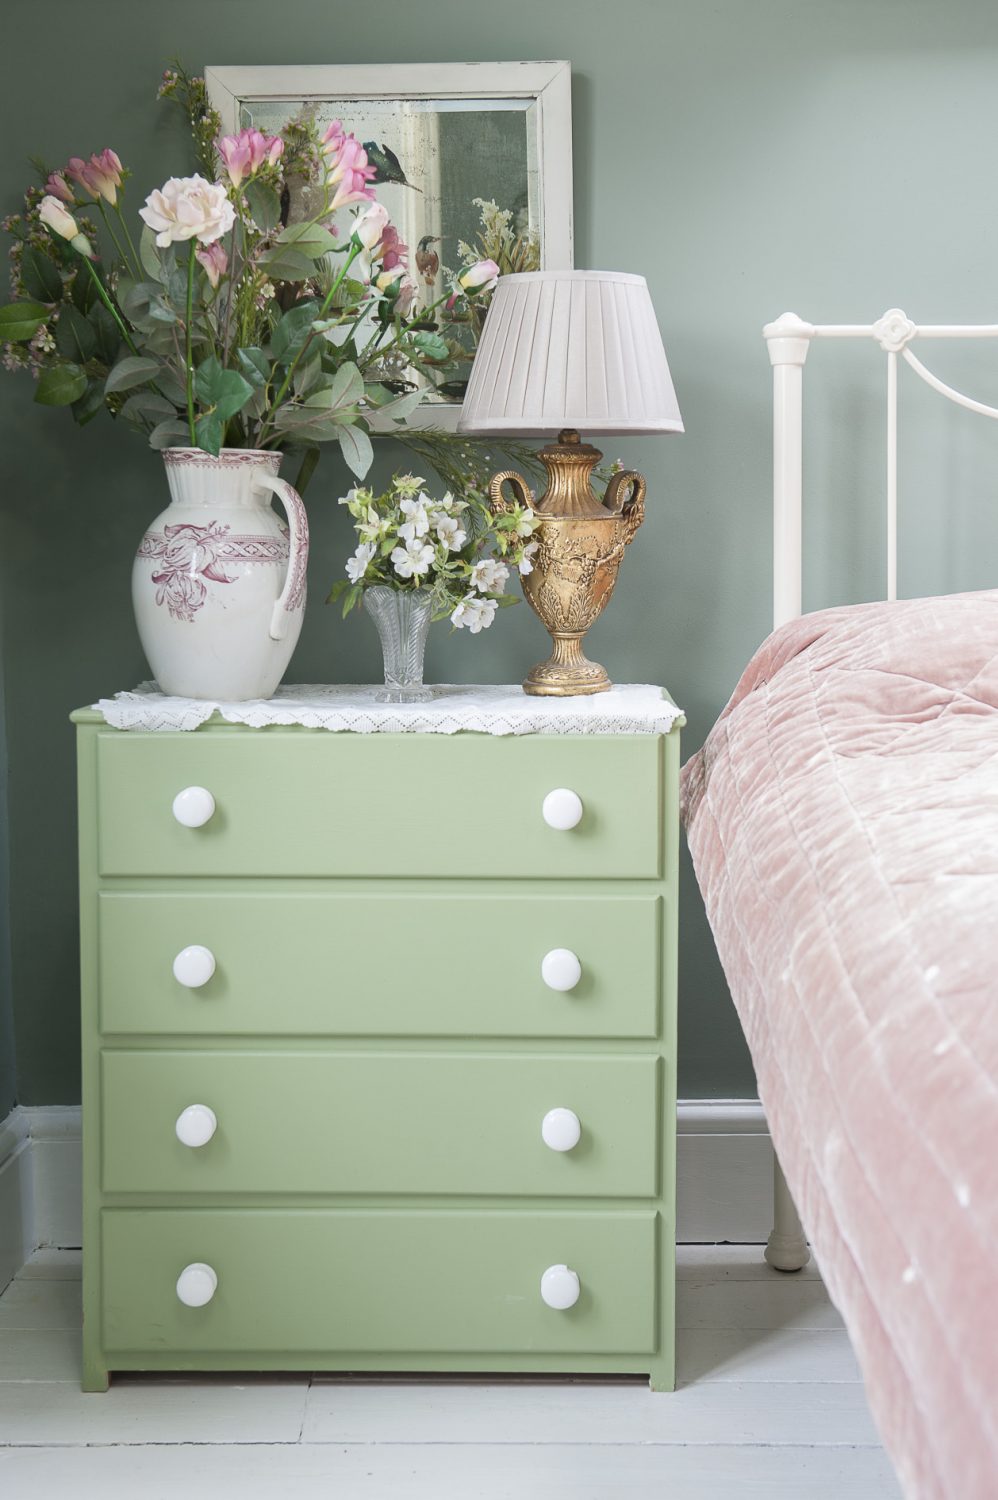 Vases of flowers in soft pastel shades complement the classic white Laura Ashley bed frame and freshly painted green chest of drawers